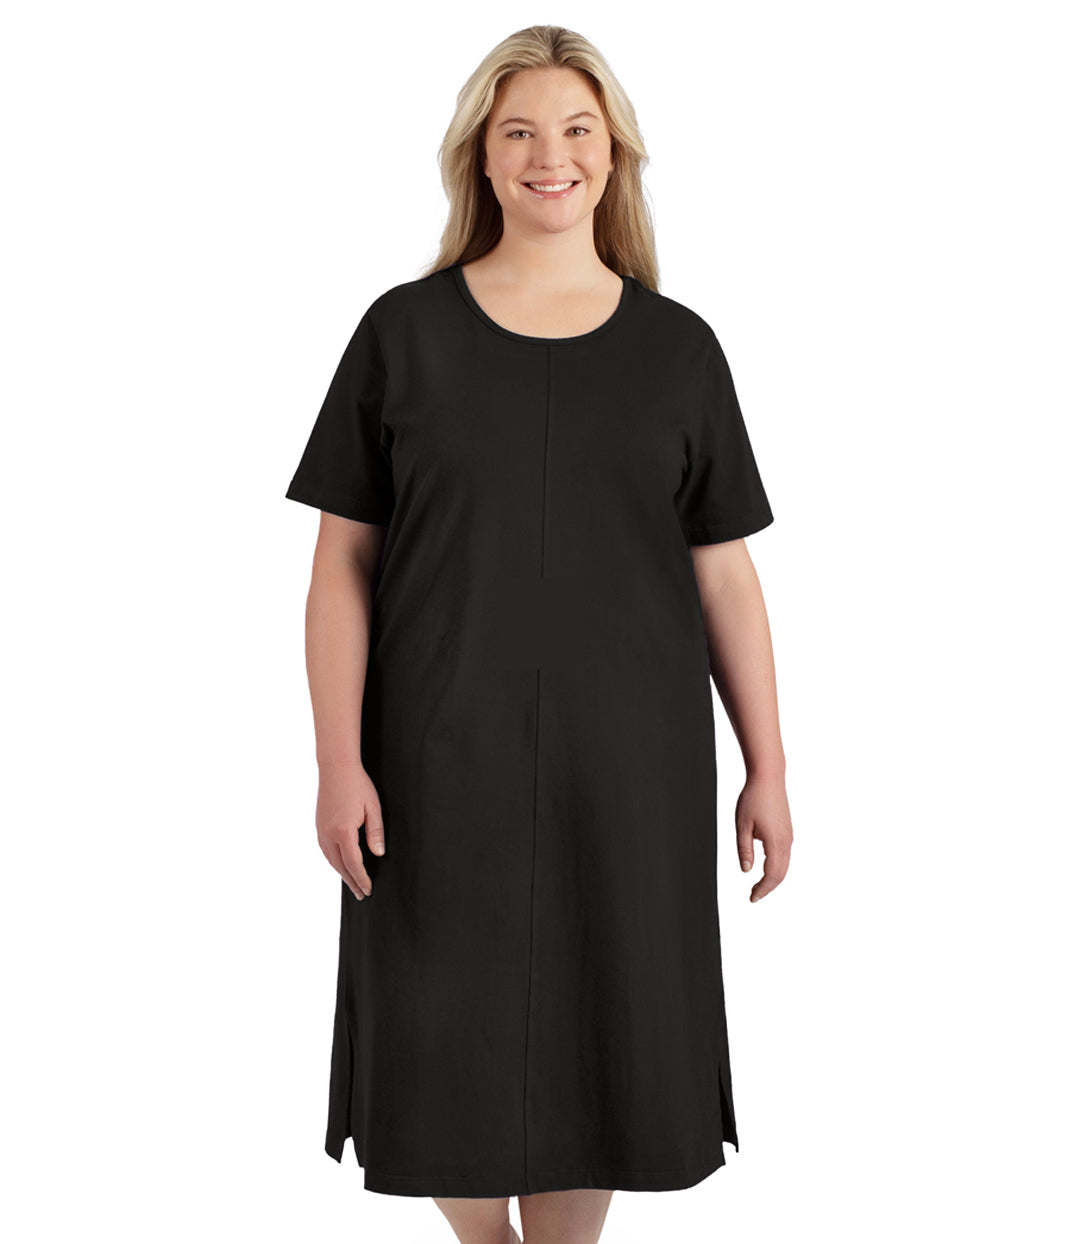 Image of Stretch Naturals Short Sleeve Dress Basic Colors